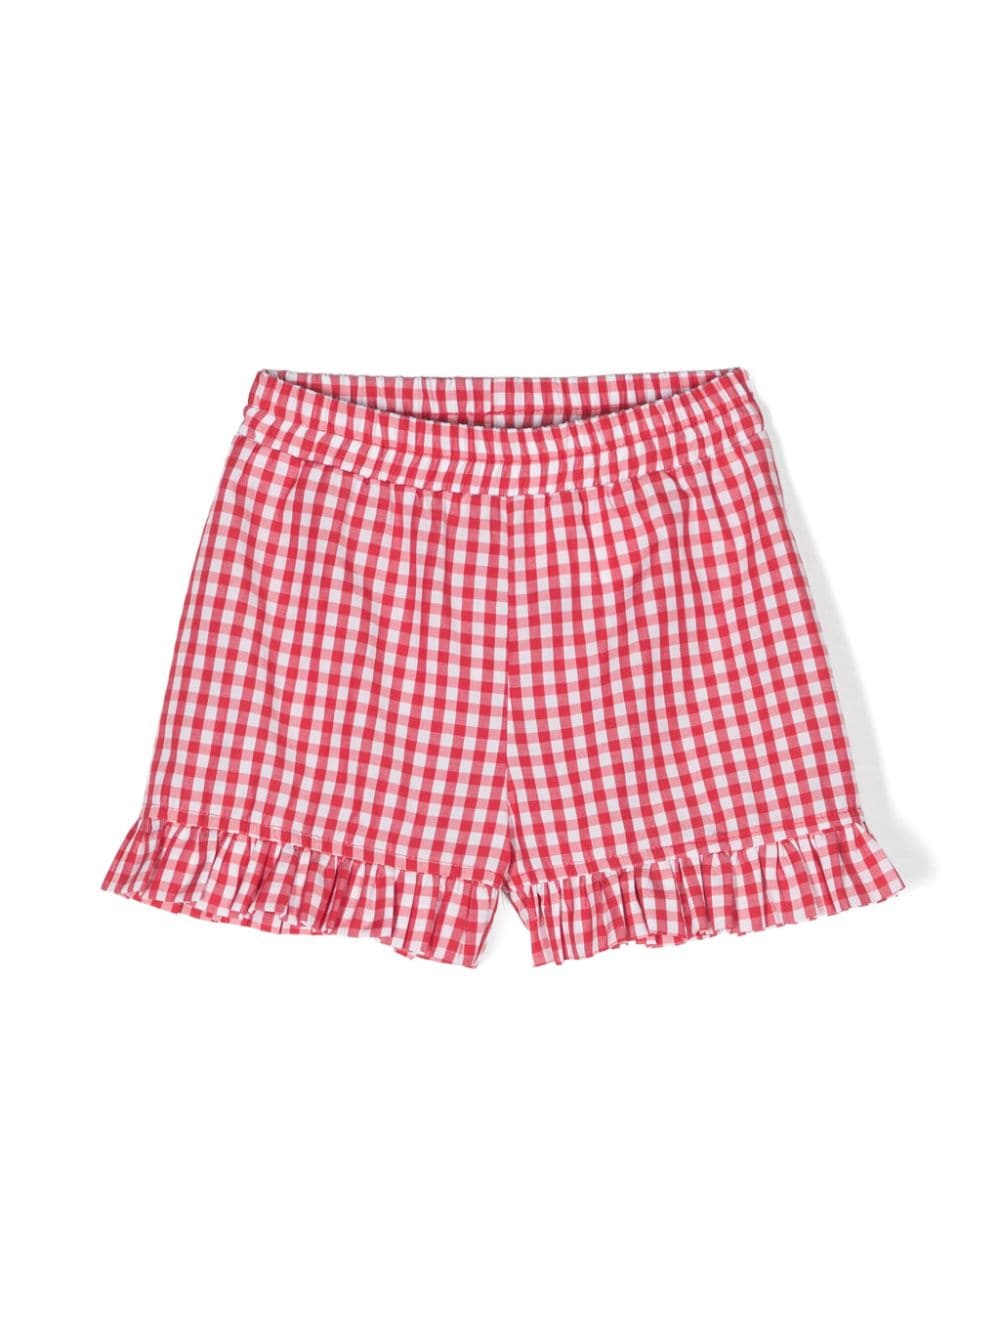 White and red shorts for baby girls